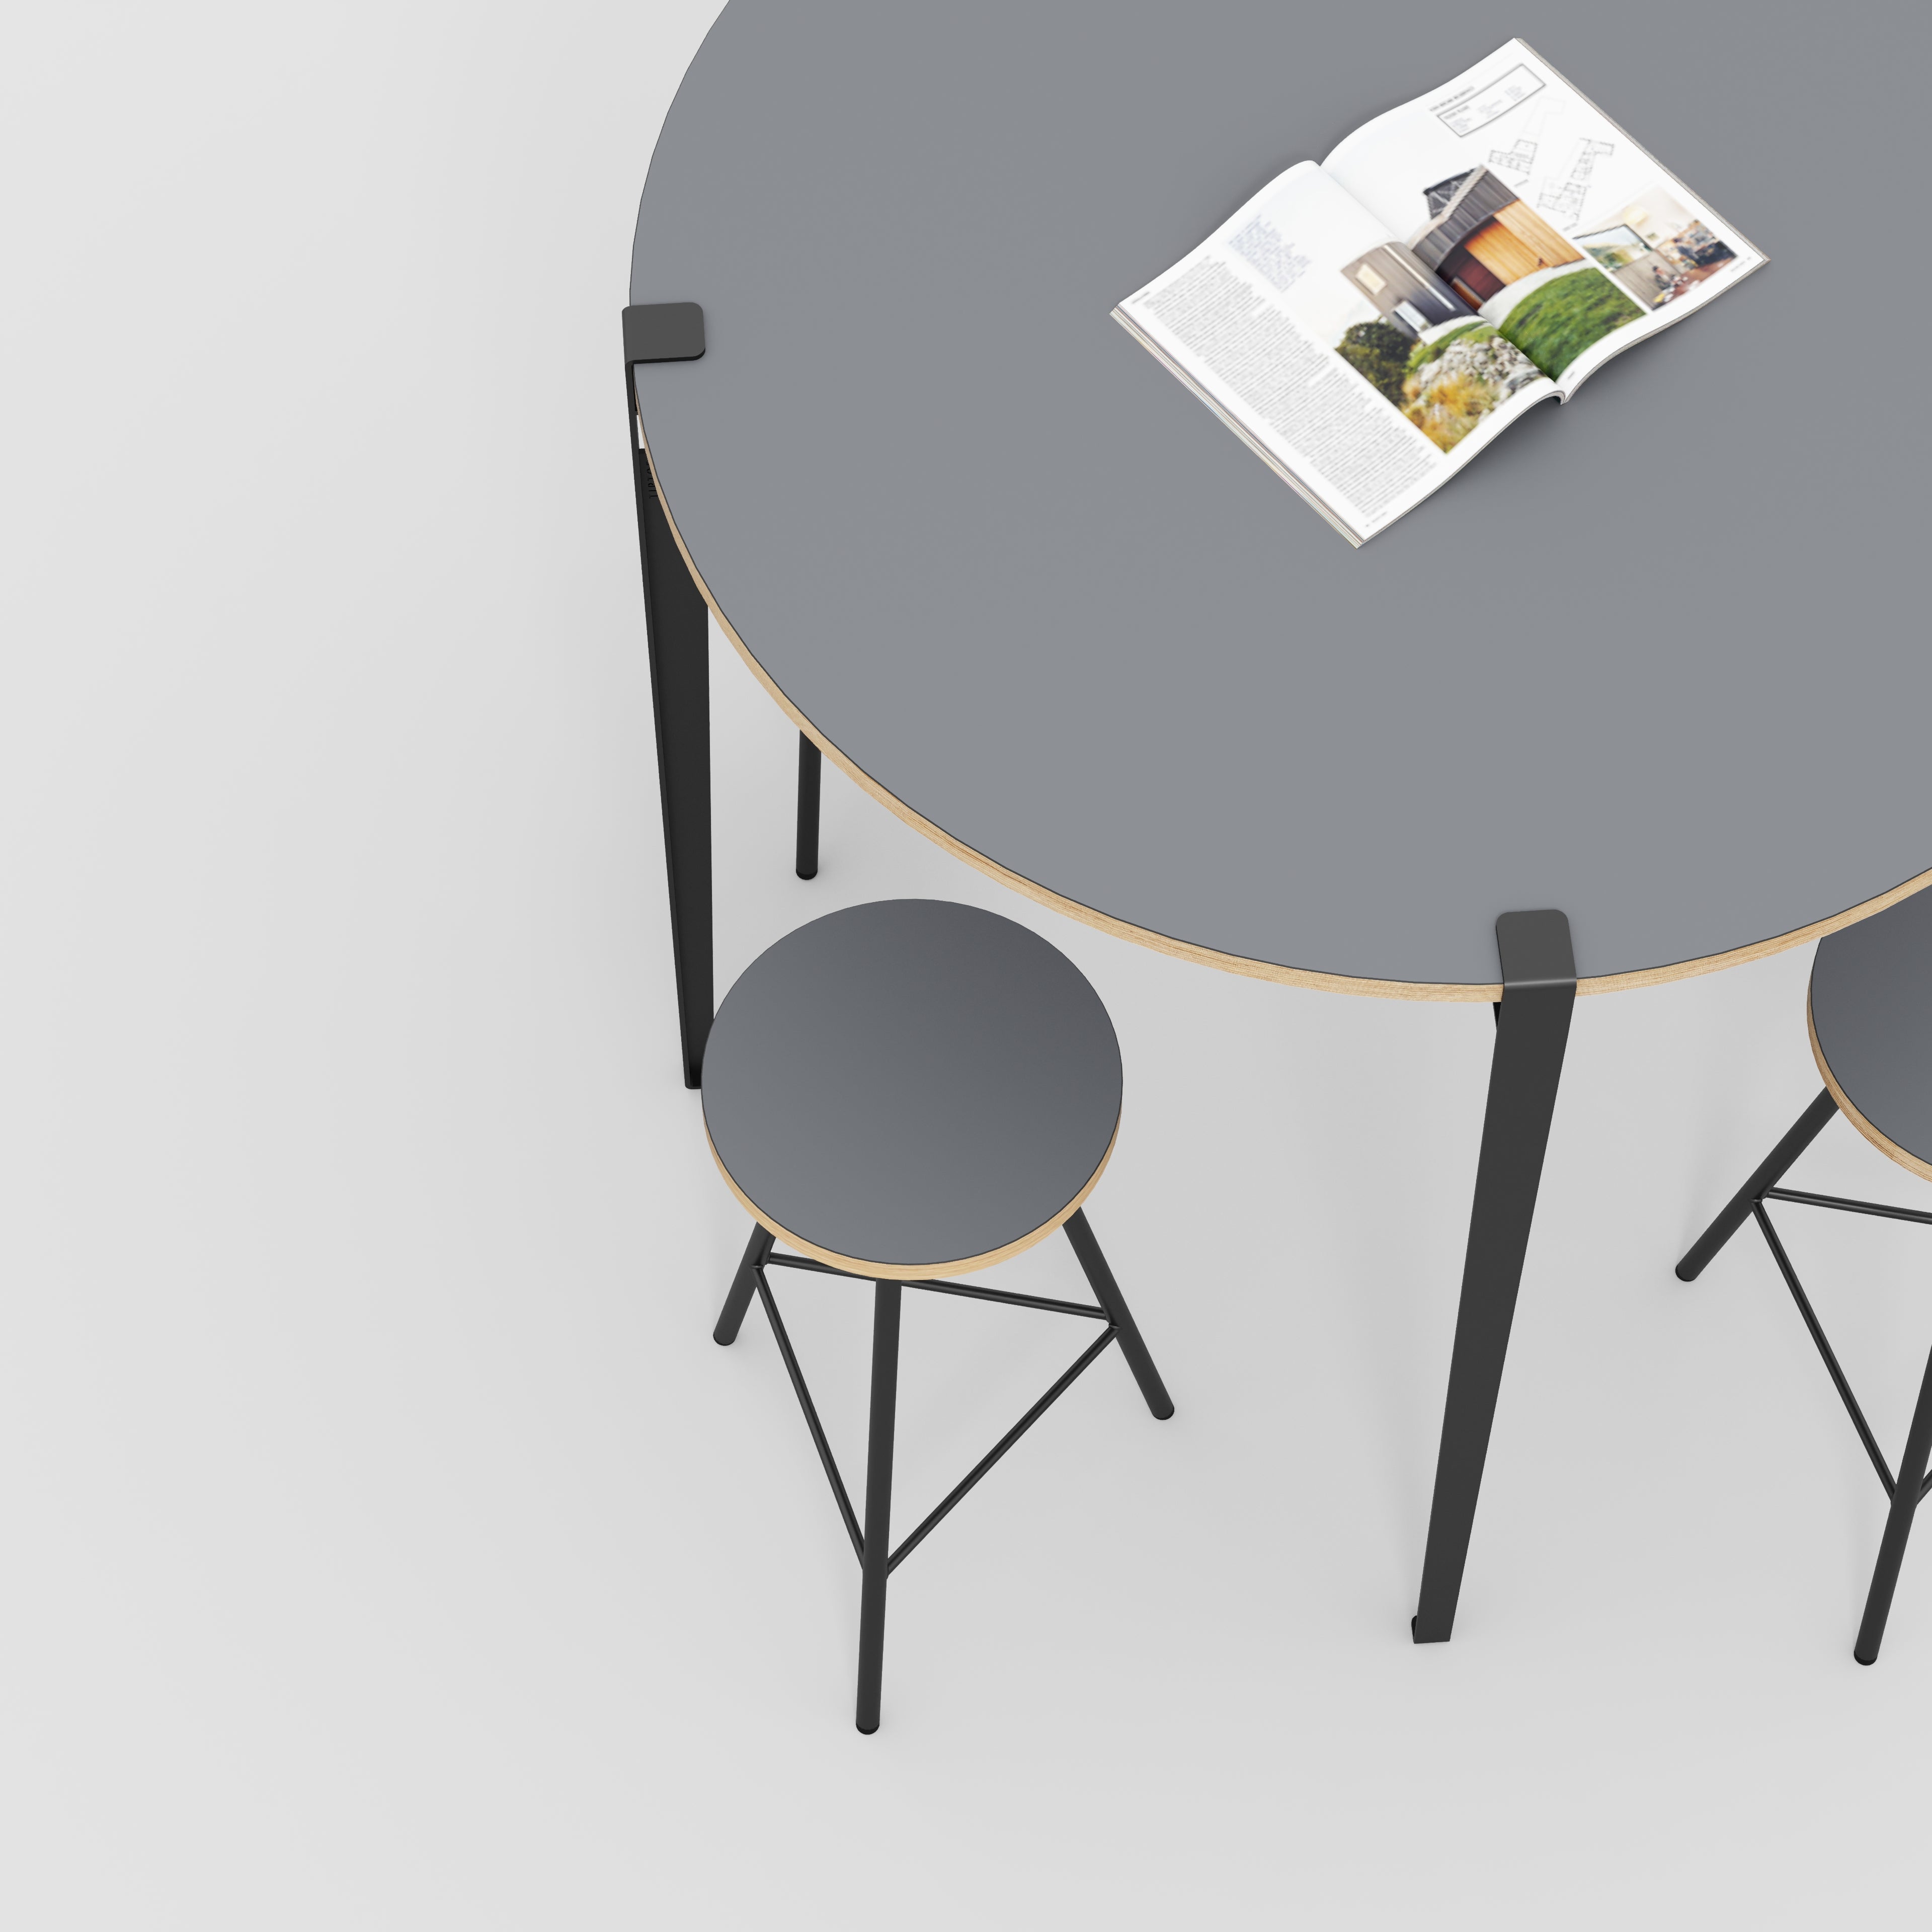 Round Table with Black Tiptoe Legs - Formica Tornado Grey - 1200(dia) x 1100(h)